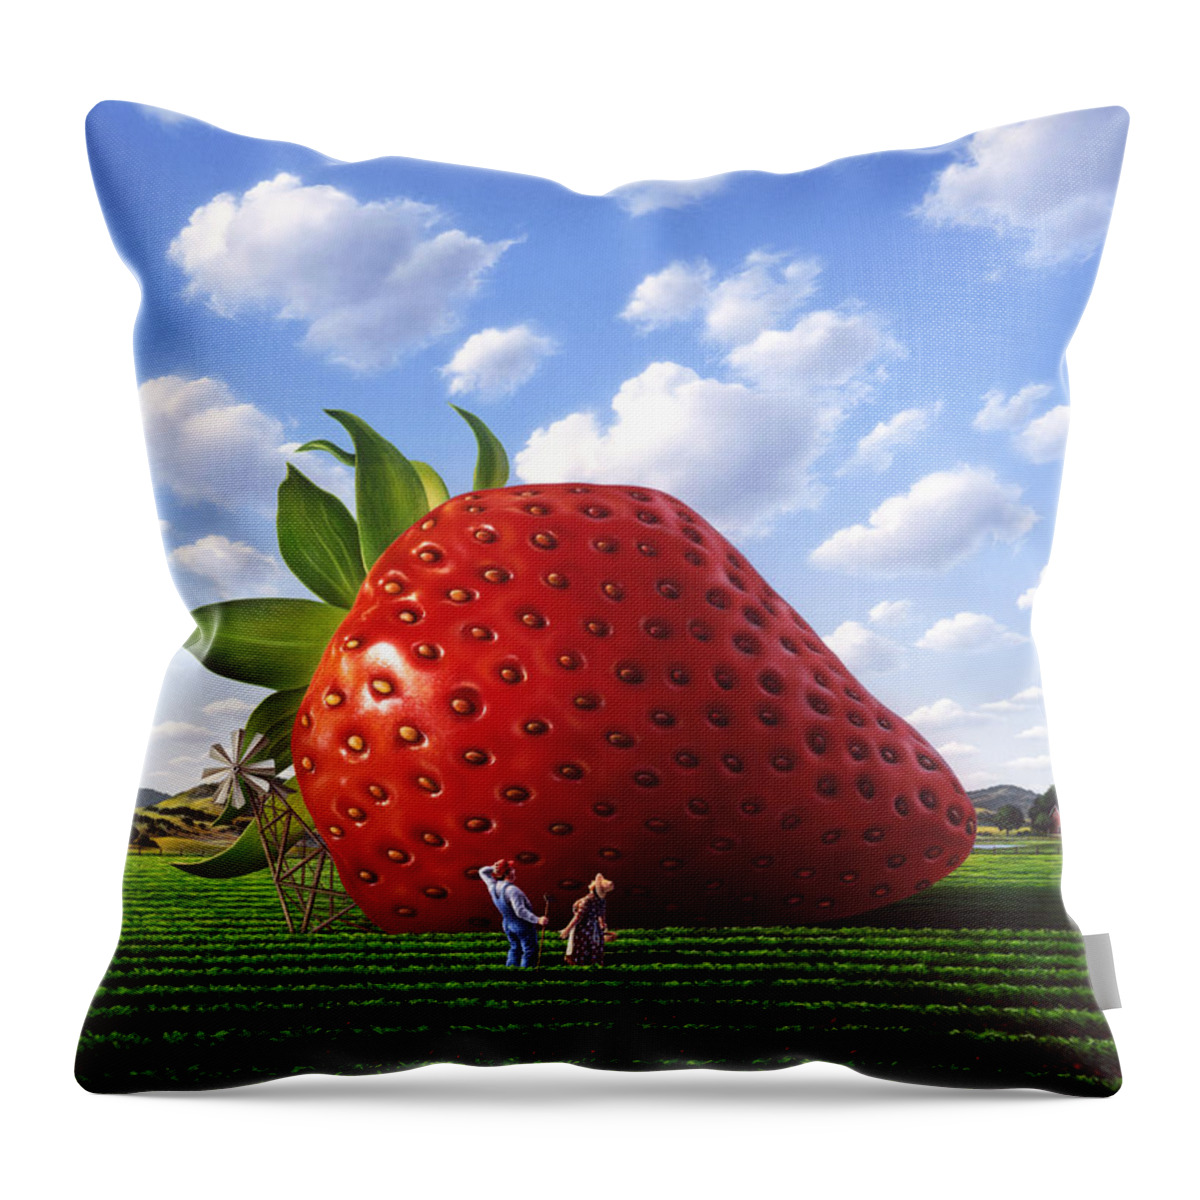 Strawberry Throw Pillow featuring the painting Unexpected Growth by Jerry LoFaro